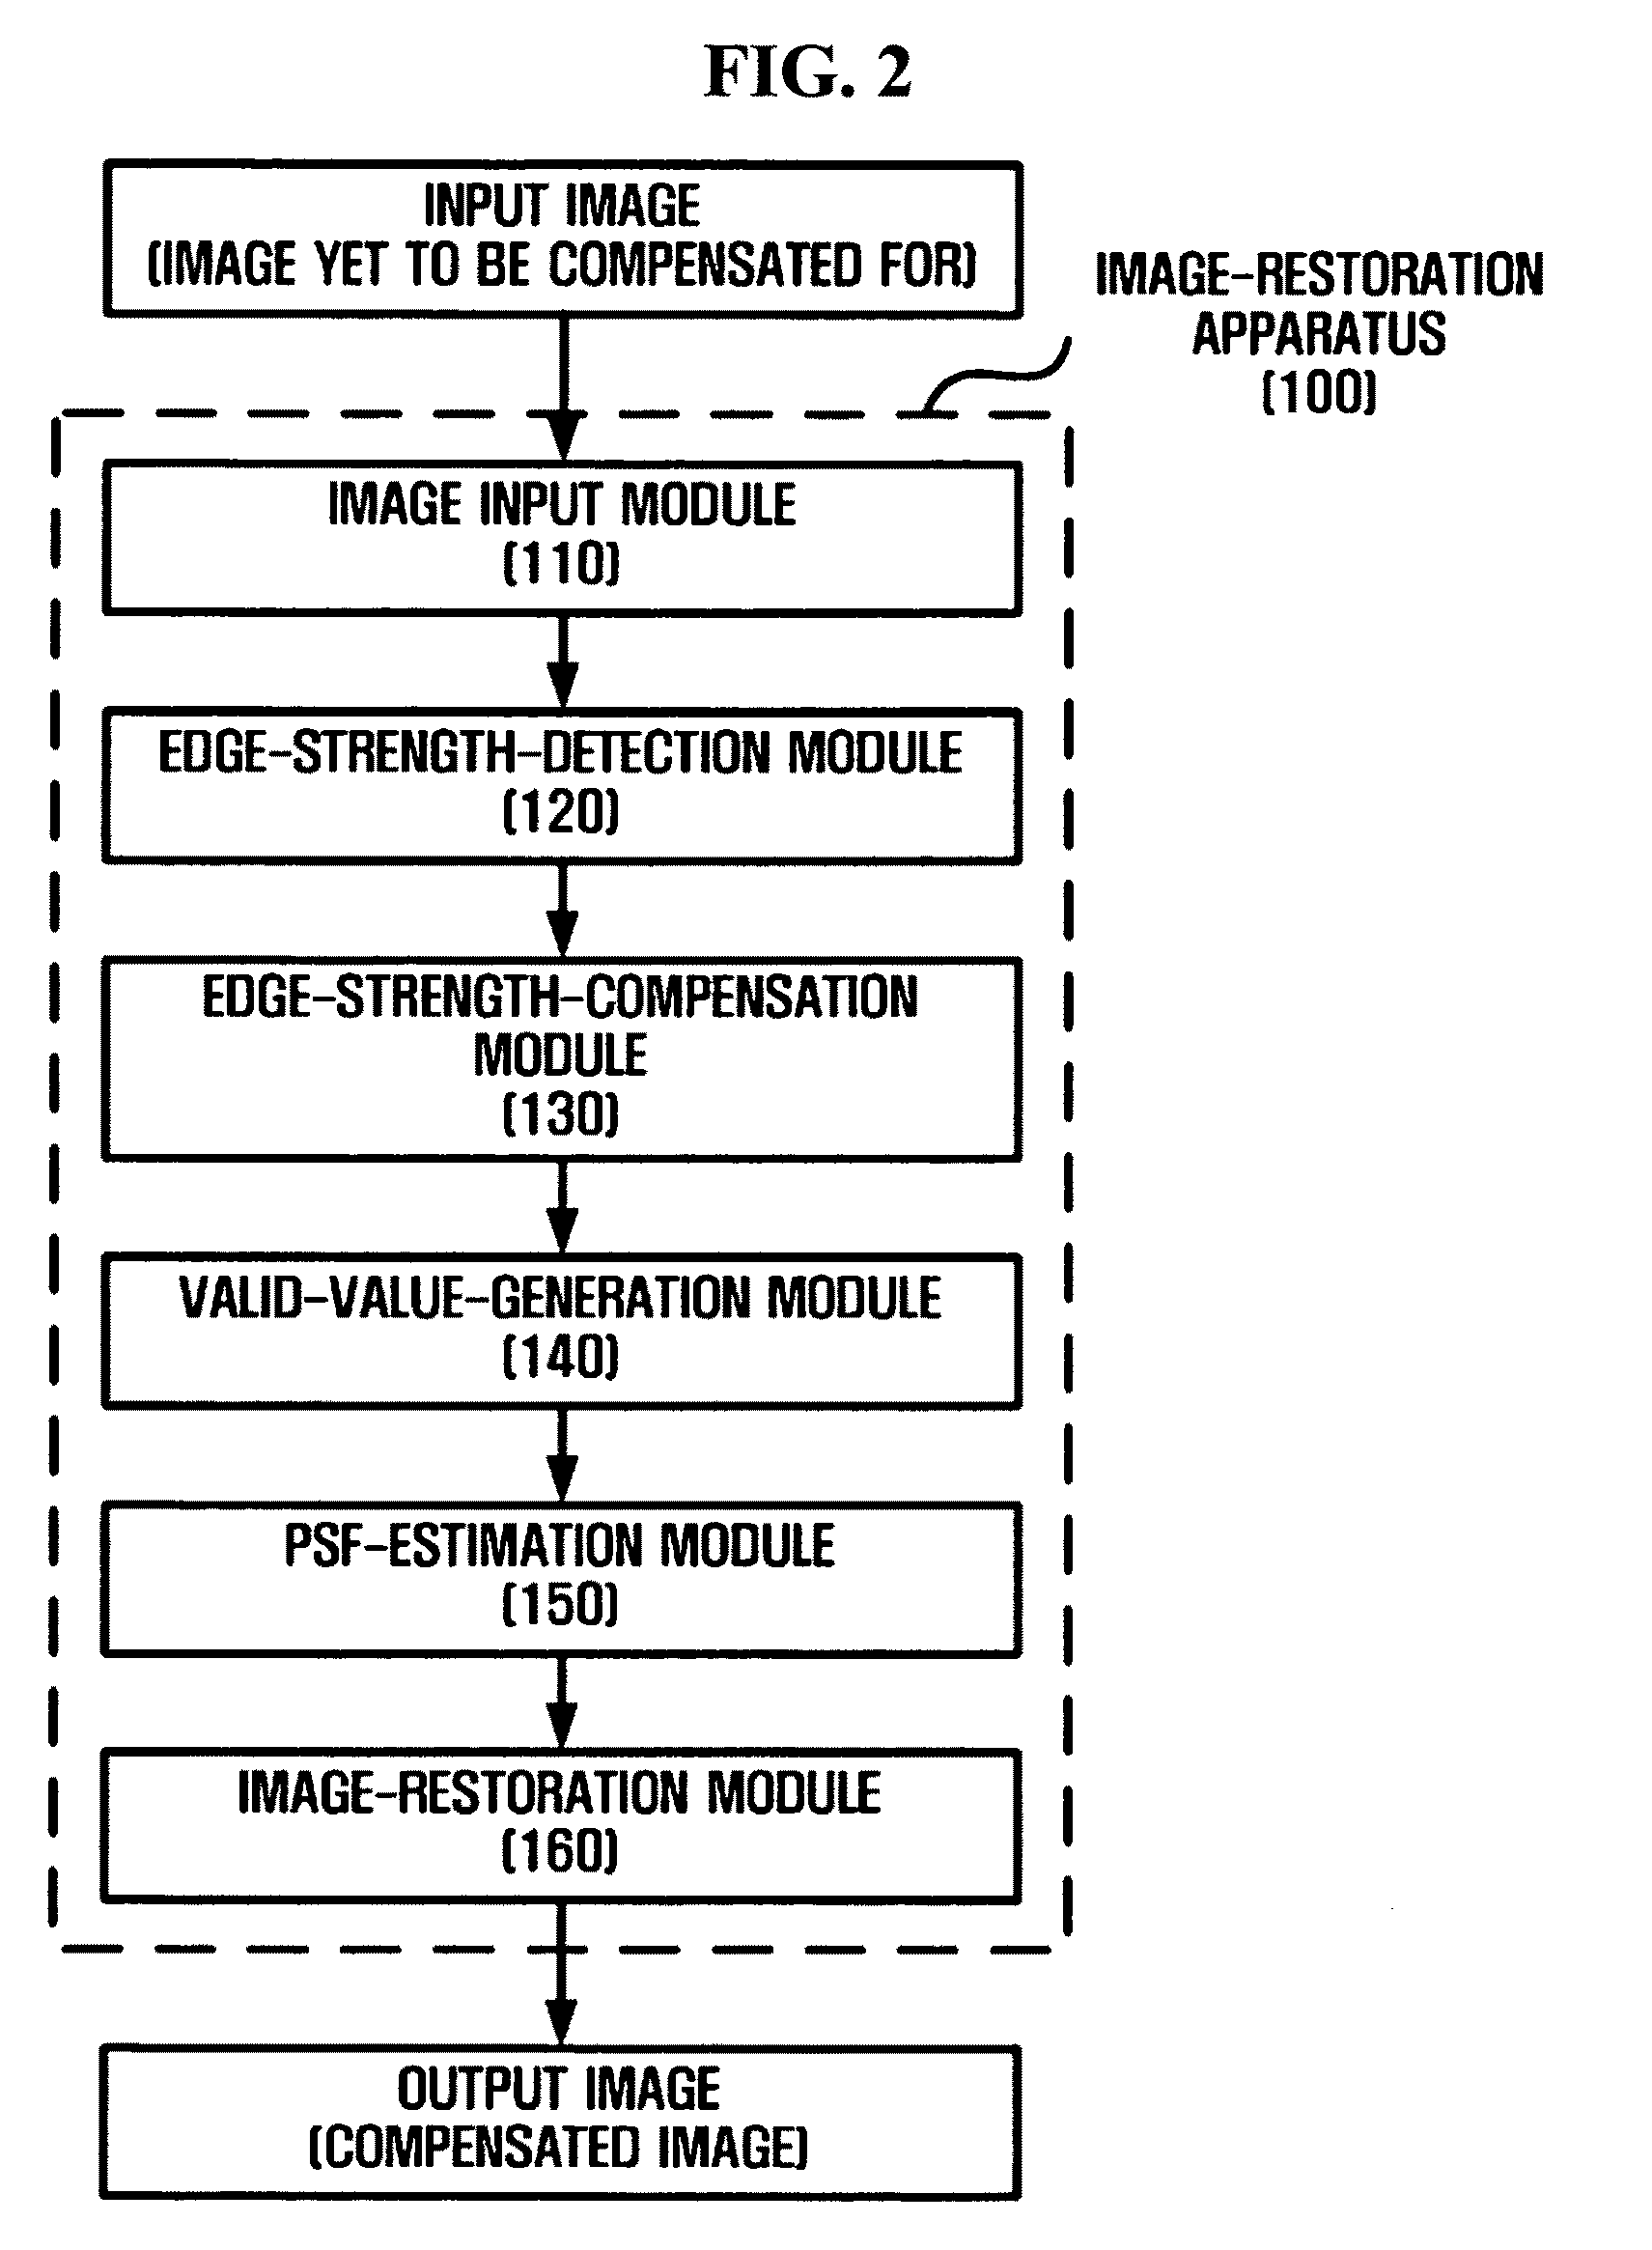 Apparatus and method for restoring image